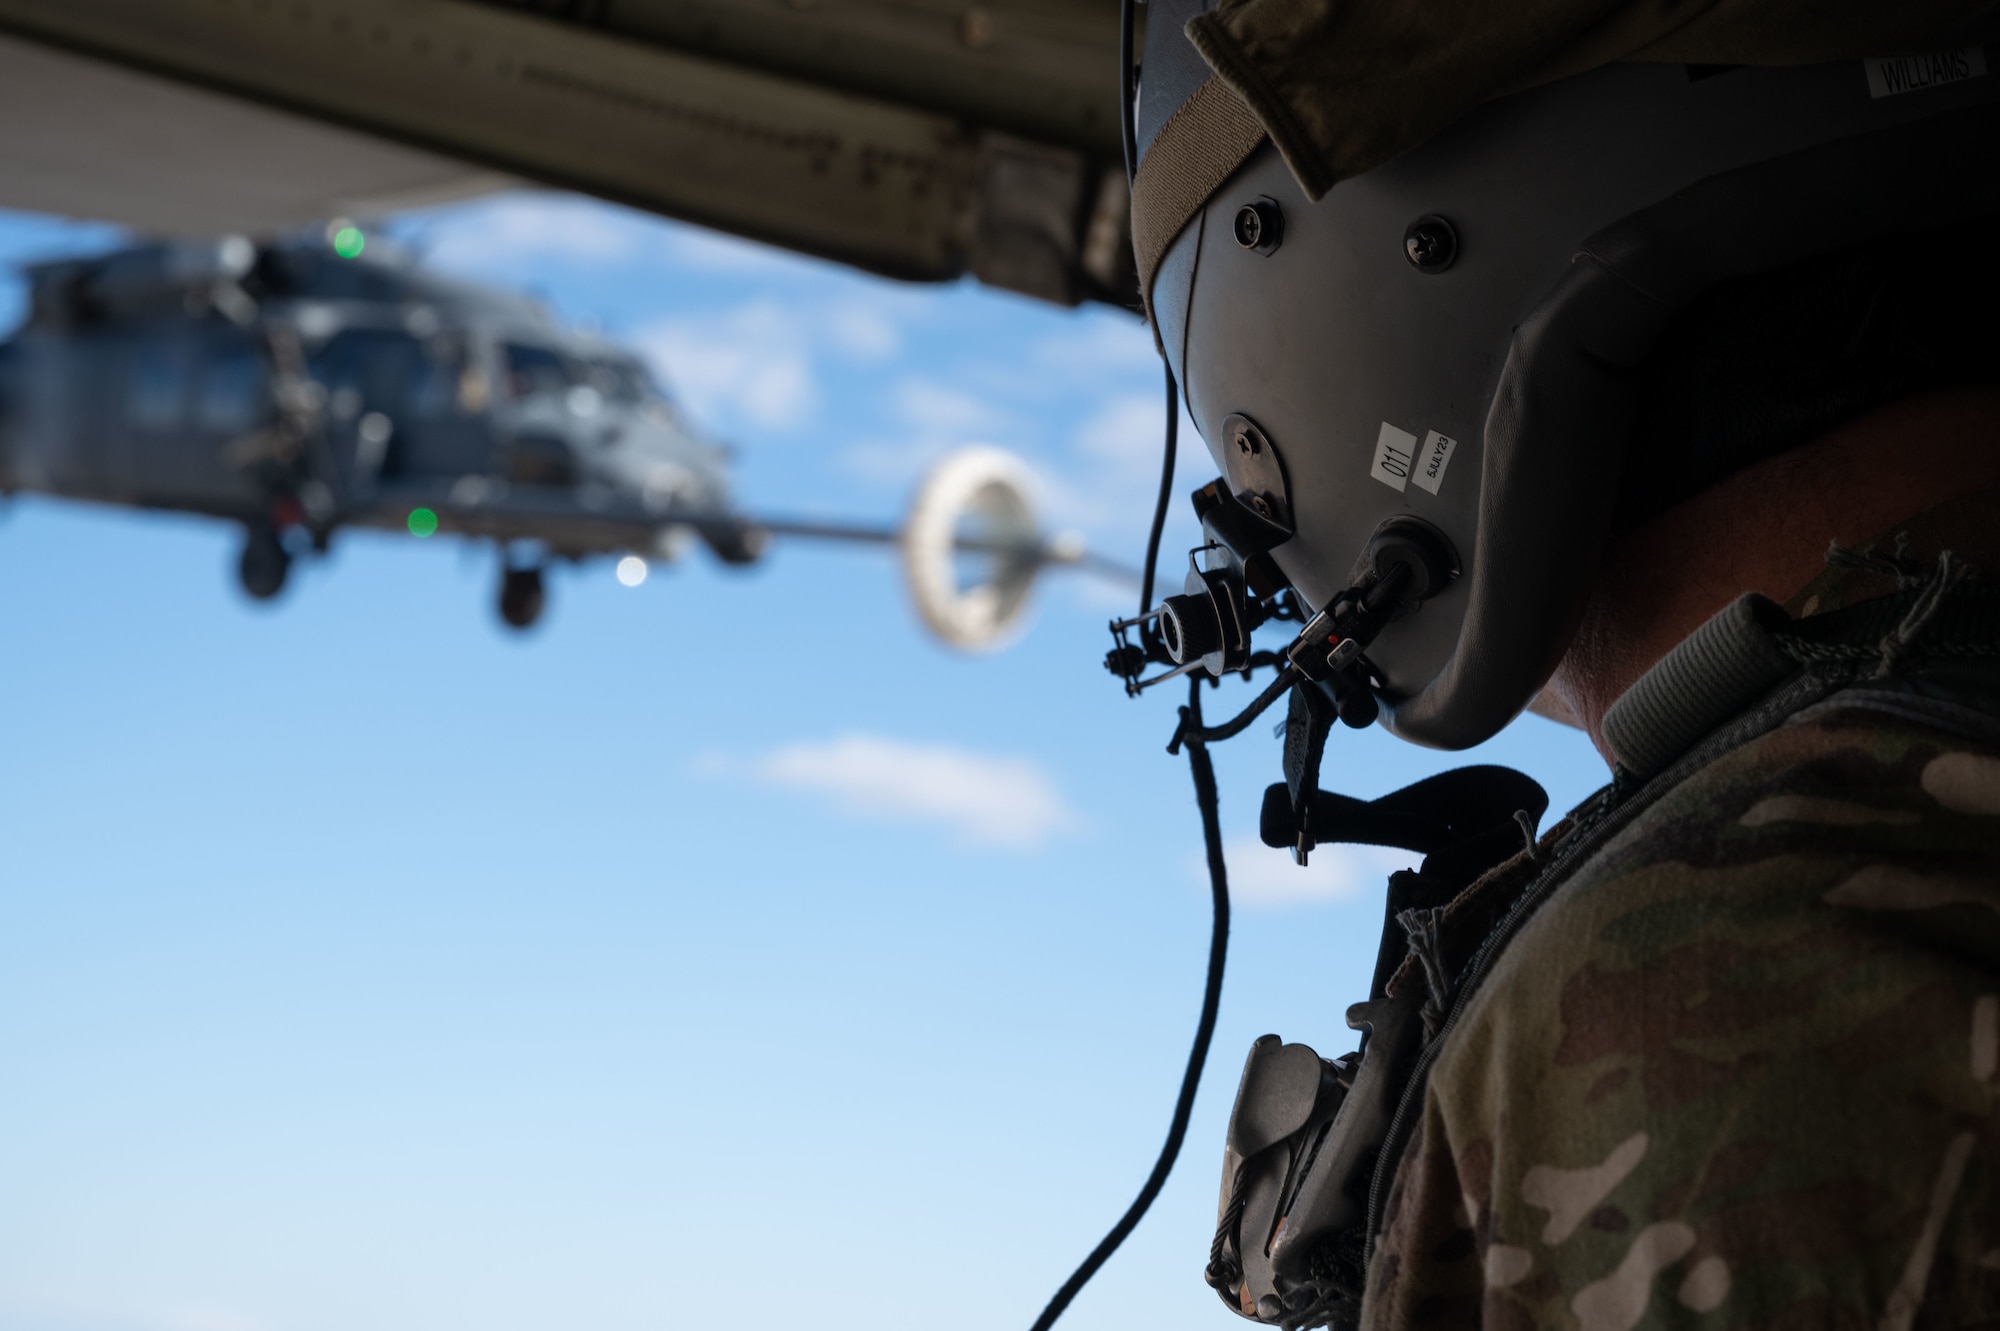 U.S. Air Force Master Sgt. David Williams, a Loadmaster assigned to the 102nd Rescue Squadron, New York Air National Guard, watches as an HH-60G Pave Hawk assigned to the 101st Rescue Squadron, New York Air National Guard conducts air-to-air refueling during Red Flag-Nellis 23-2 at Nellis Air Force Base, Nevada, March 16, 2023.